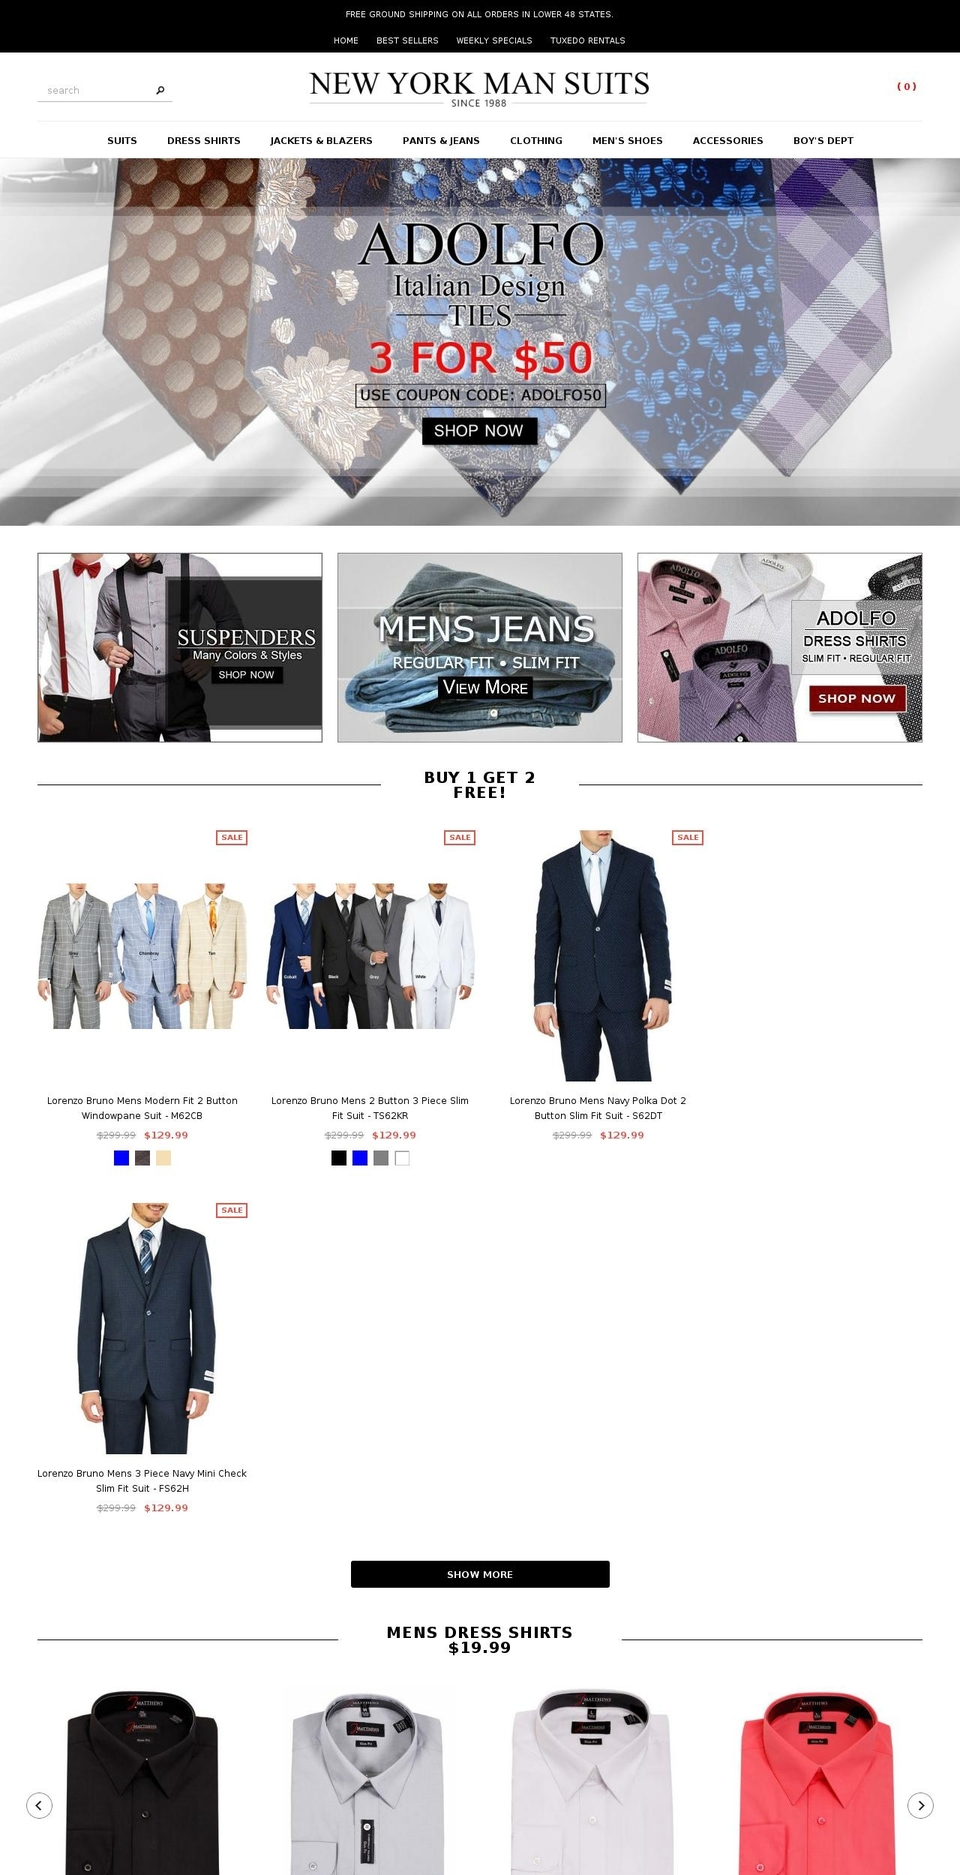 Made With ❤ By Minion Made Shopify theme site example nymsuits.com